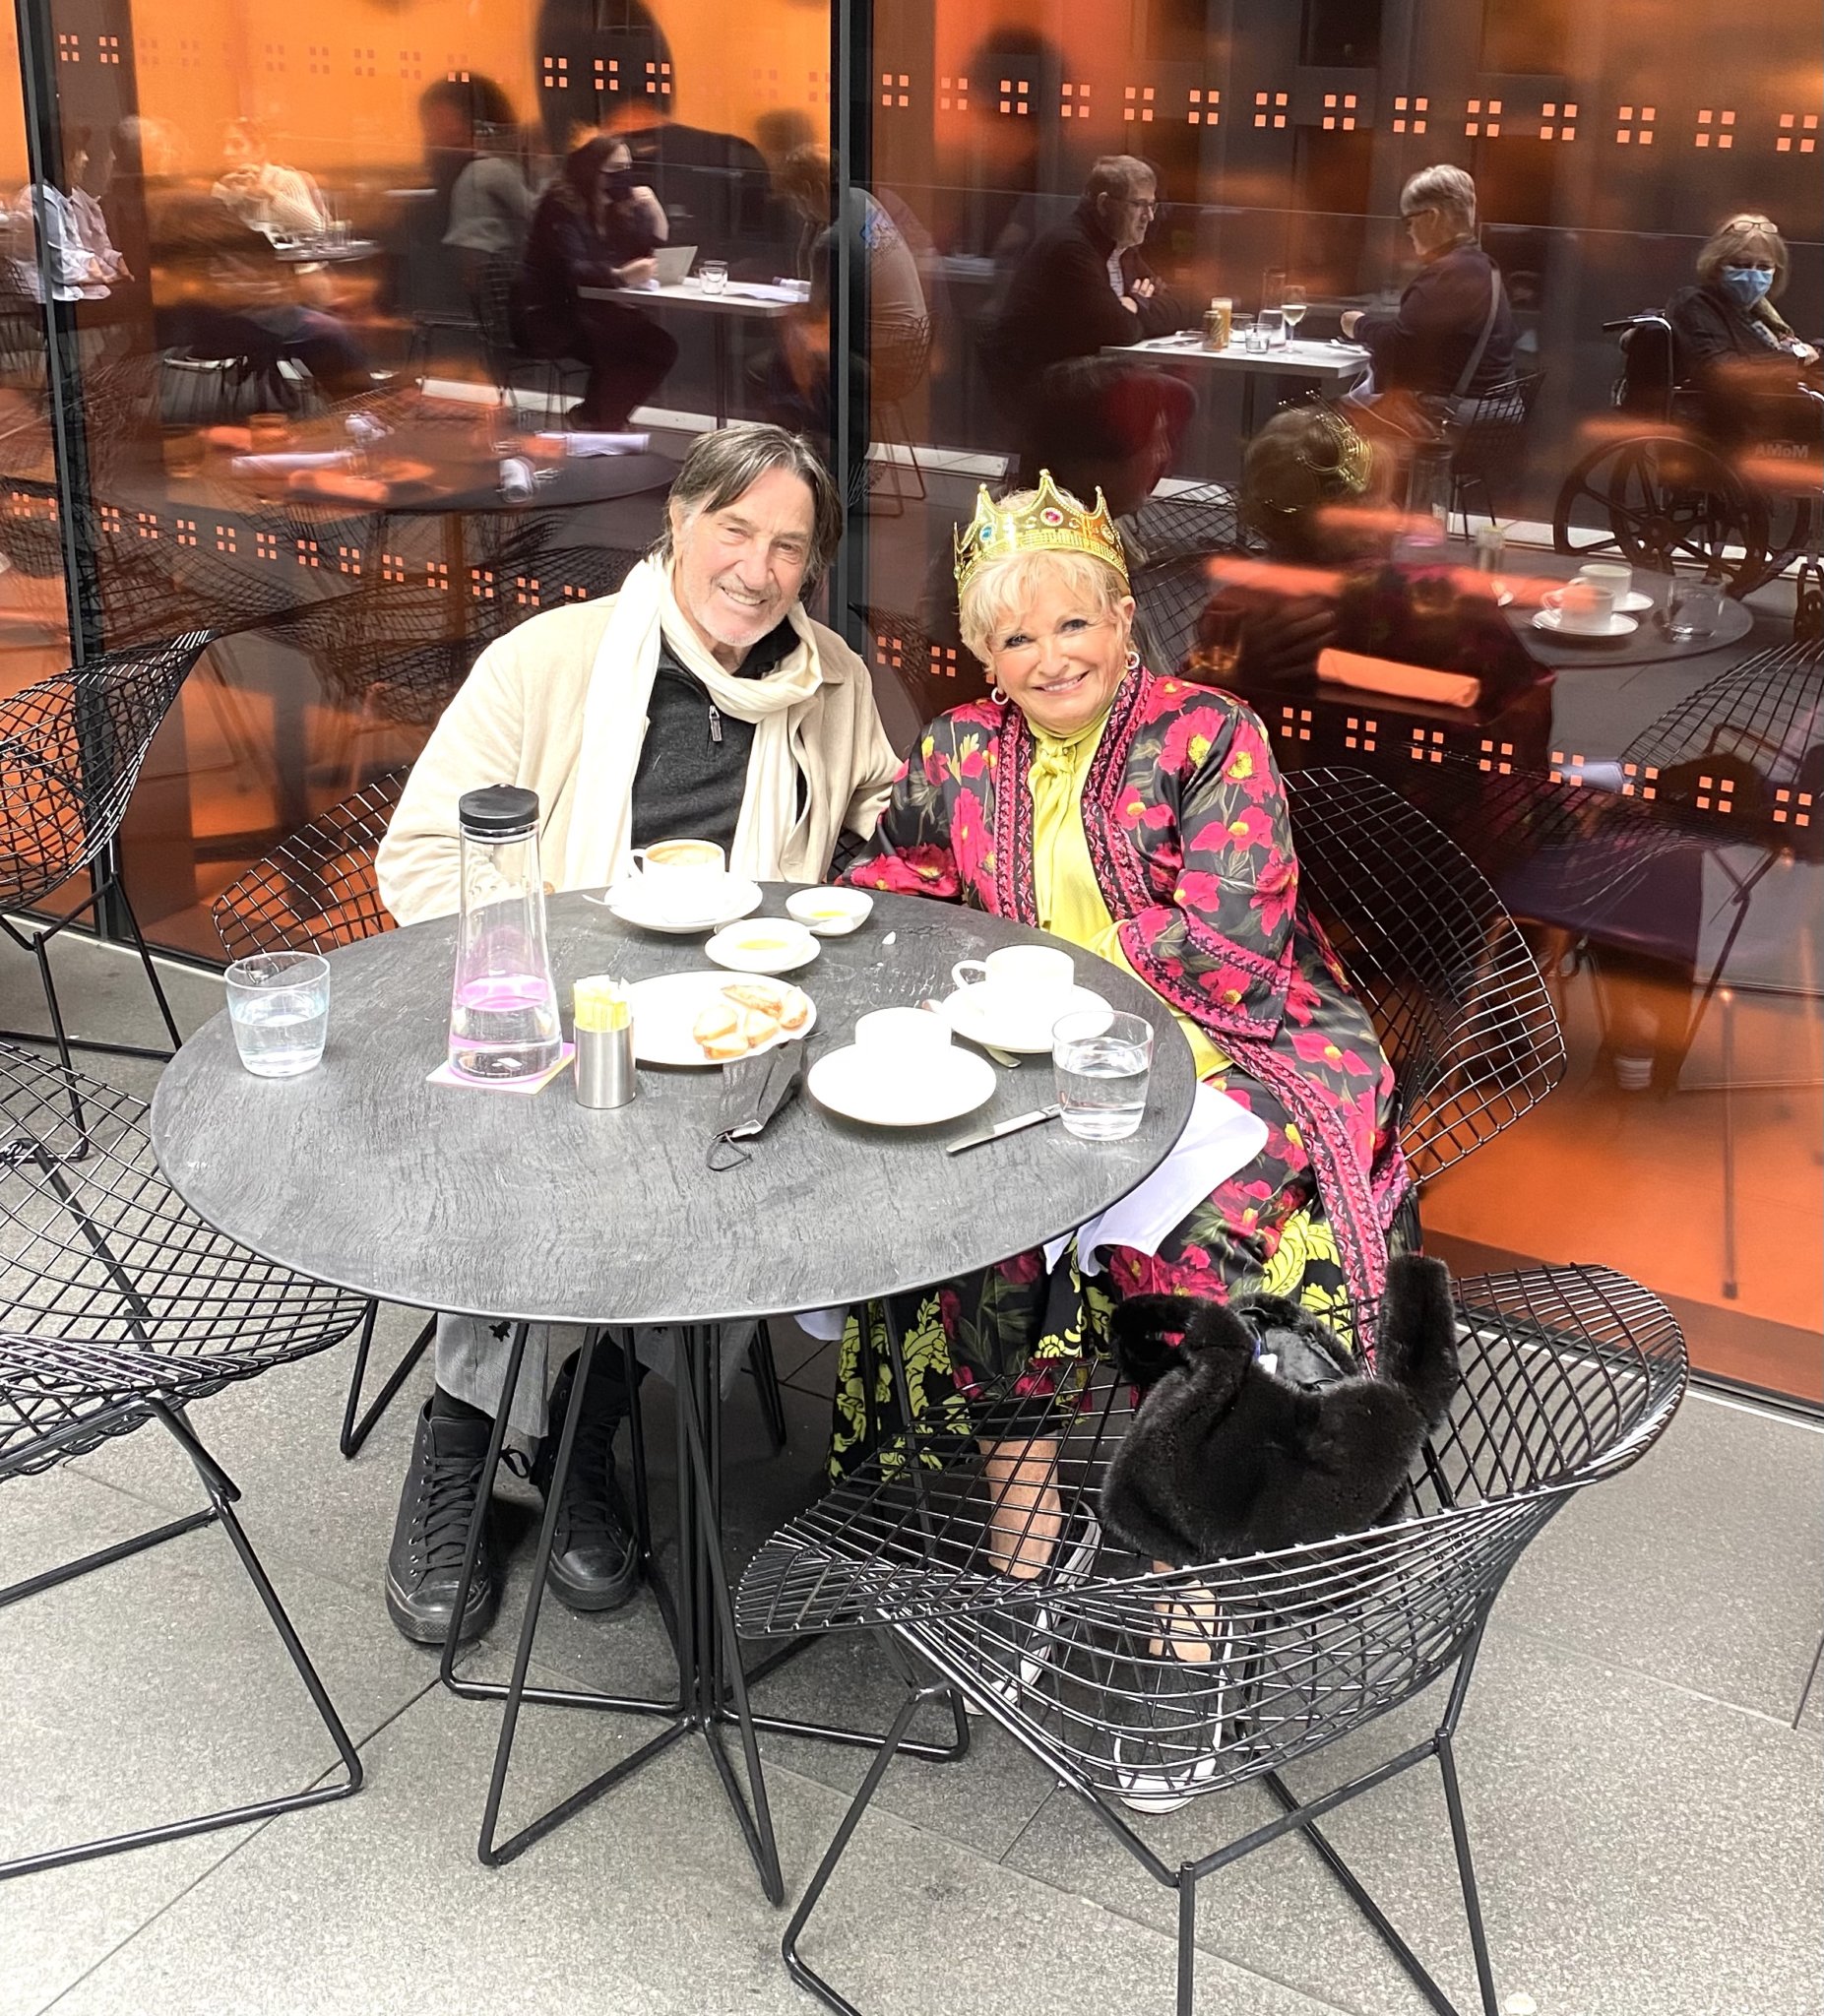 Victoria Schneps enjoying a bite with Hans at MoMA!